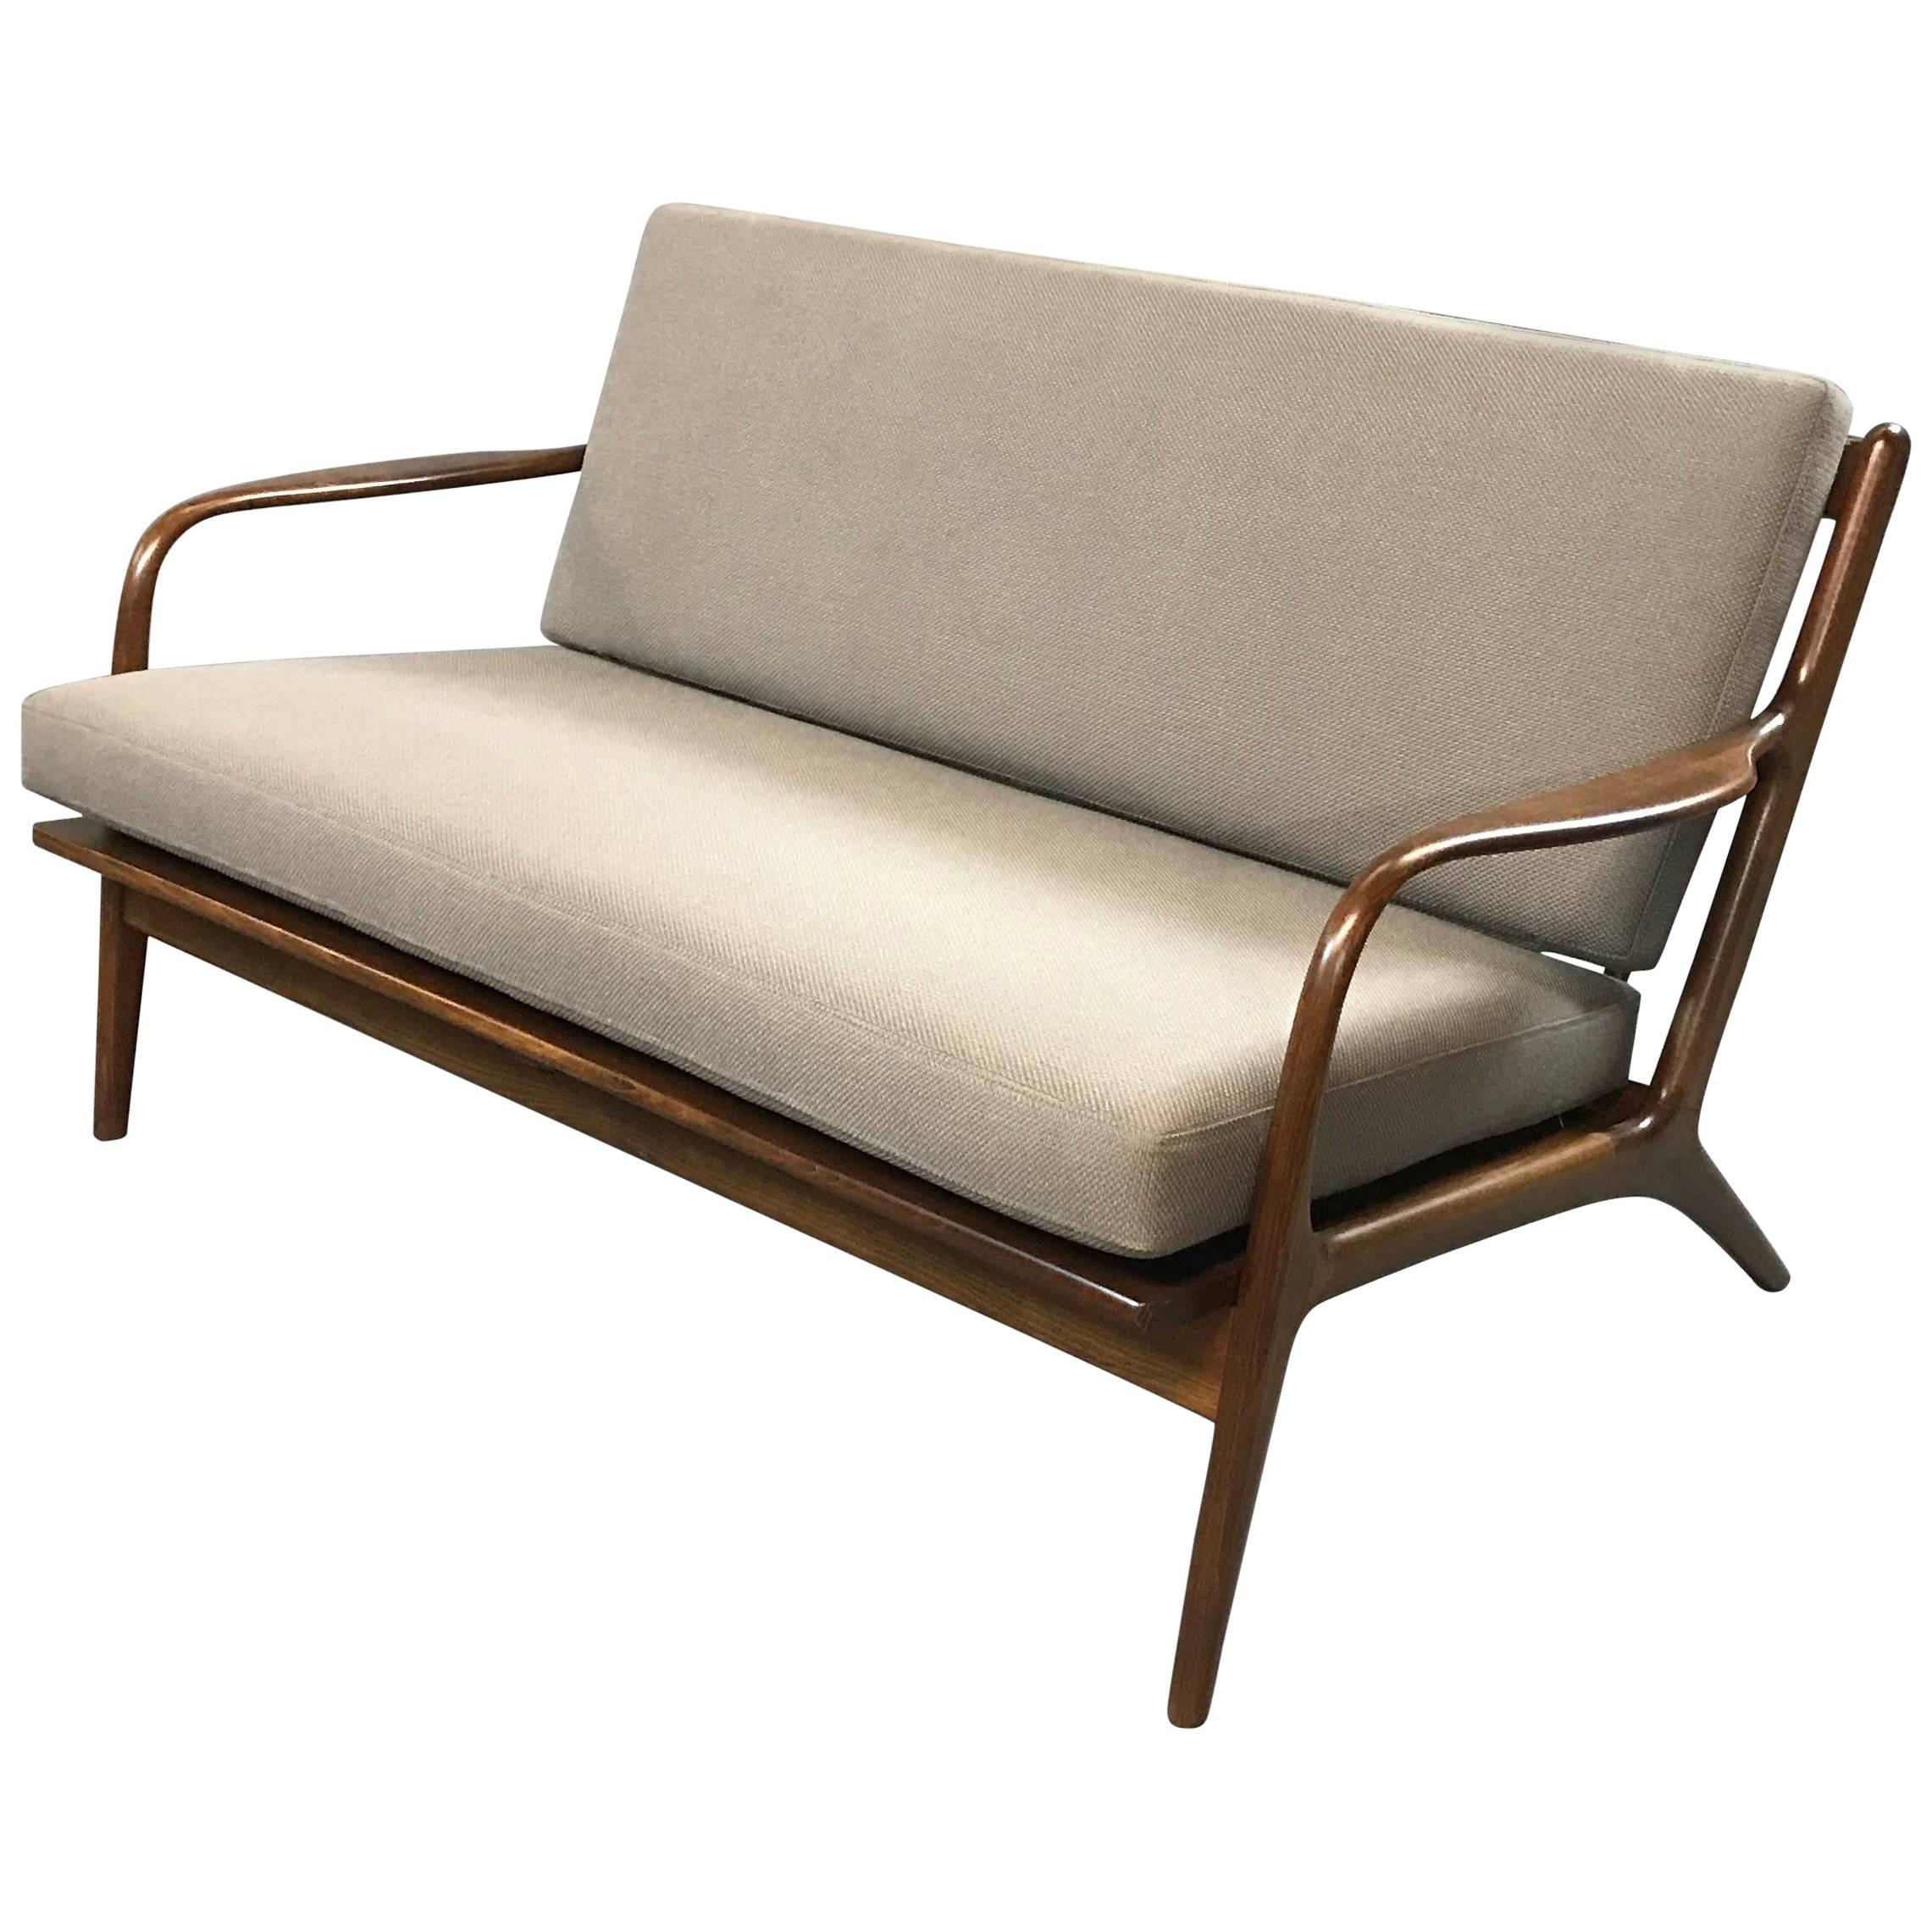 Mid-Century Modern Maple Sofa by Adrian Pearsall for Craft Associates